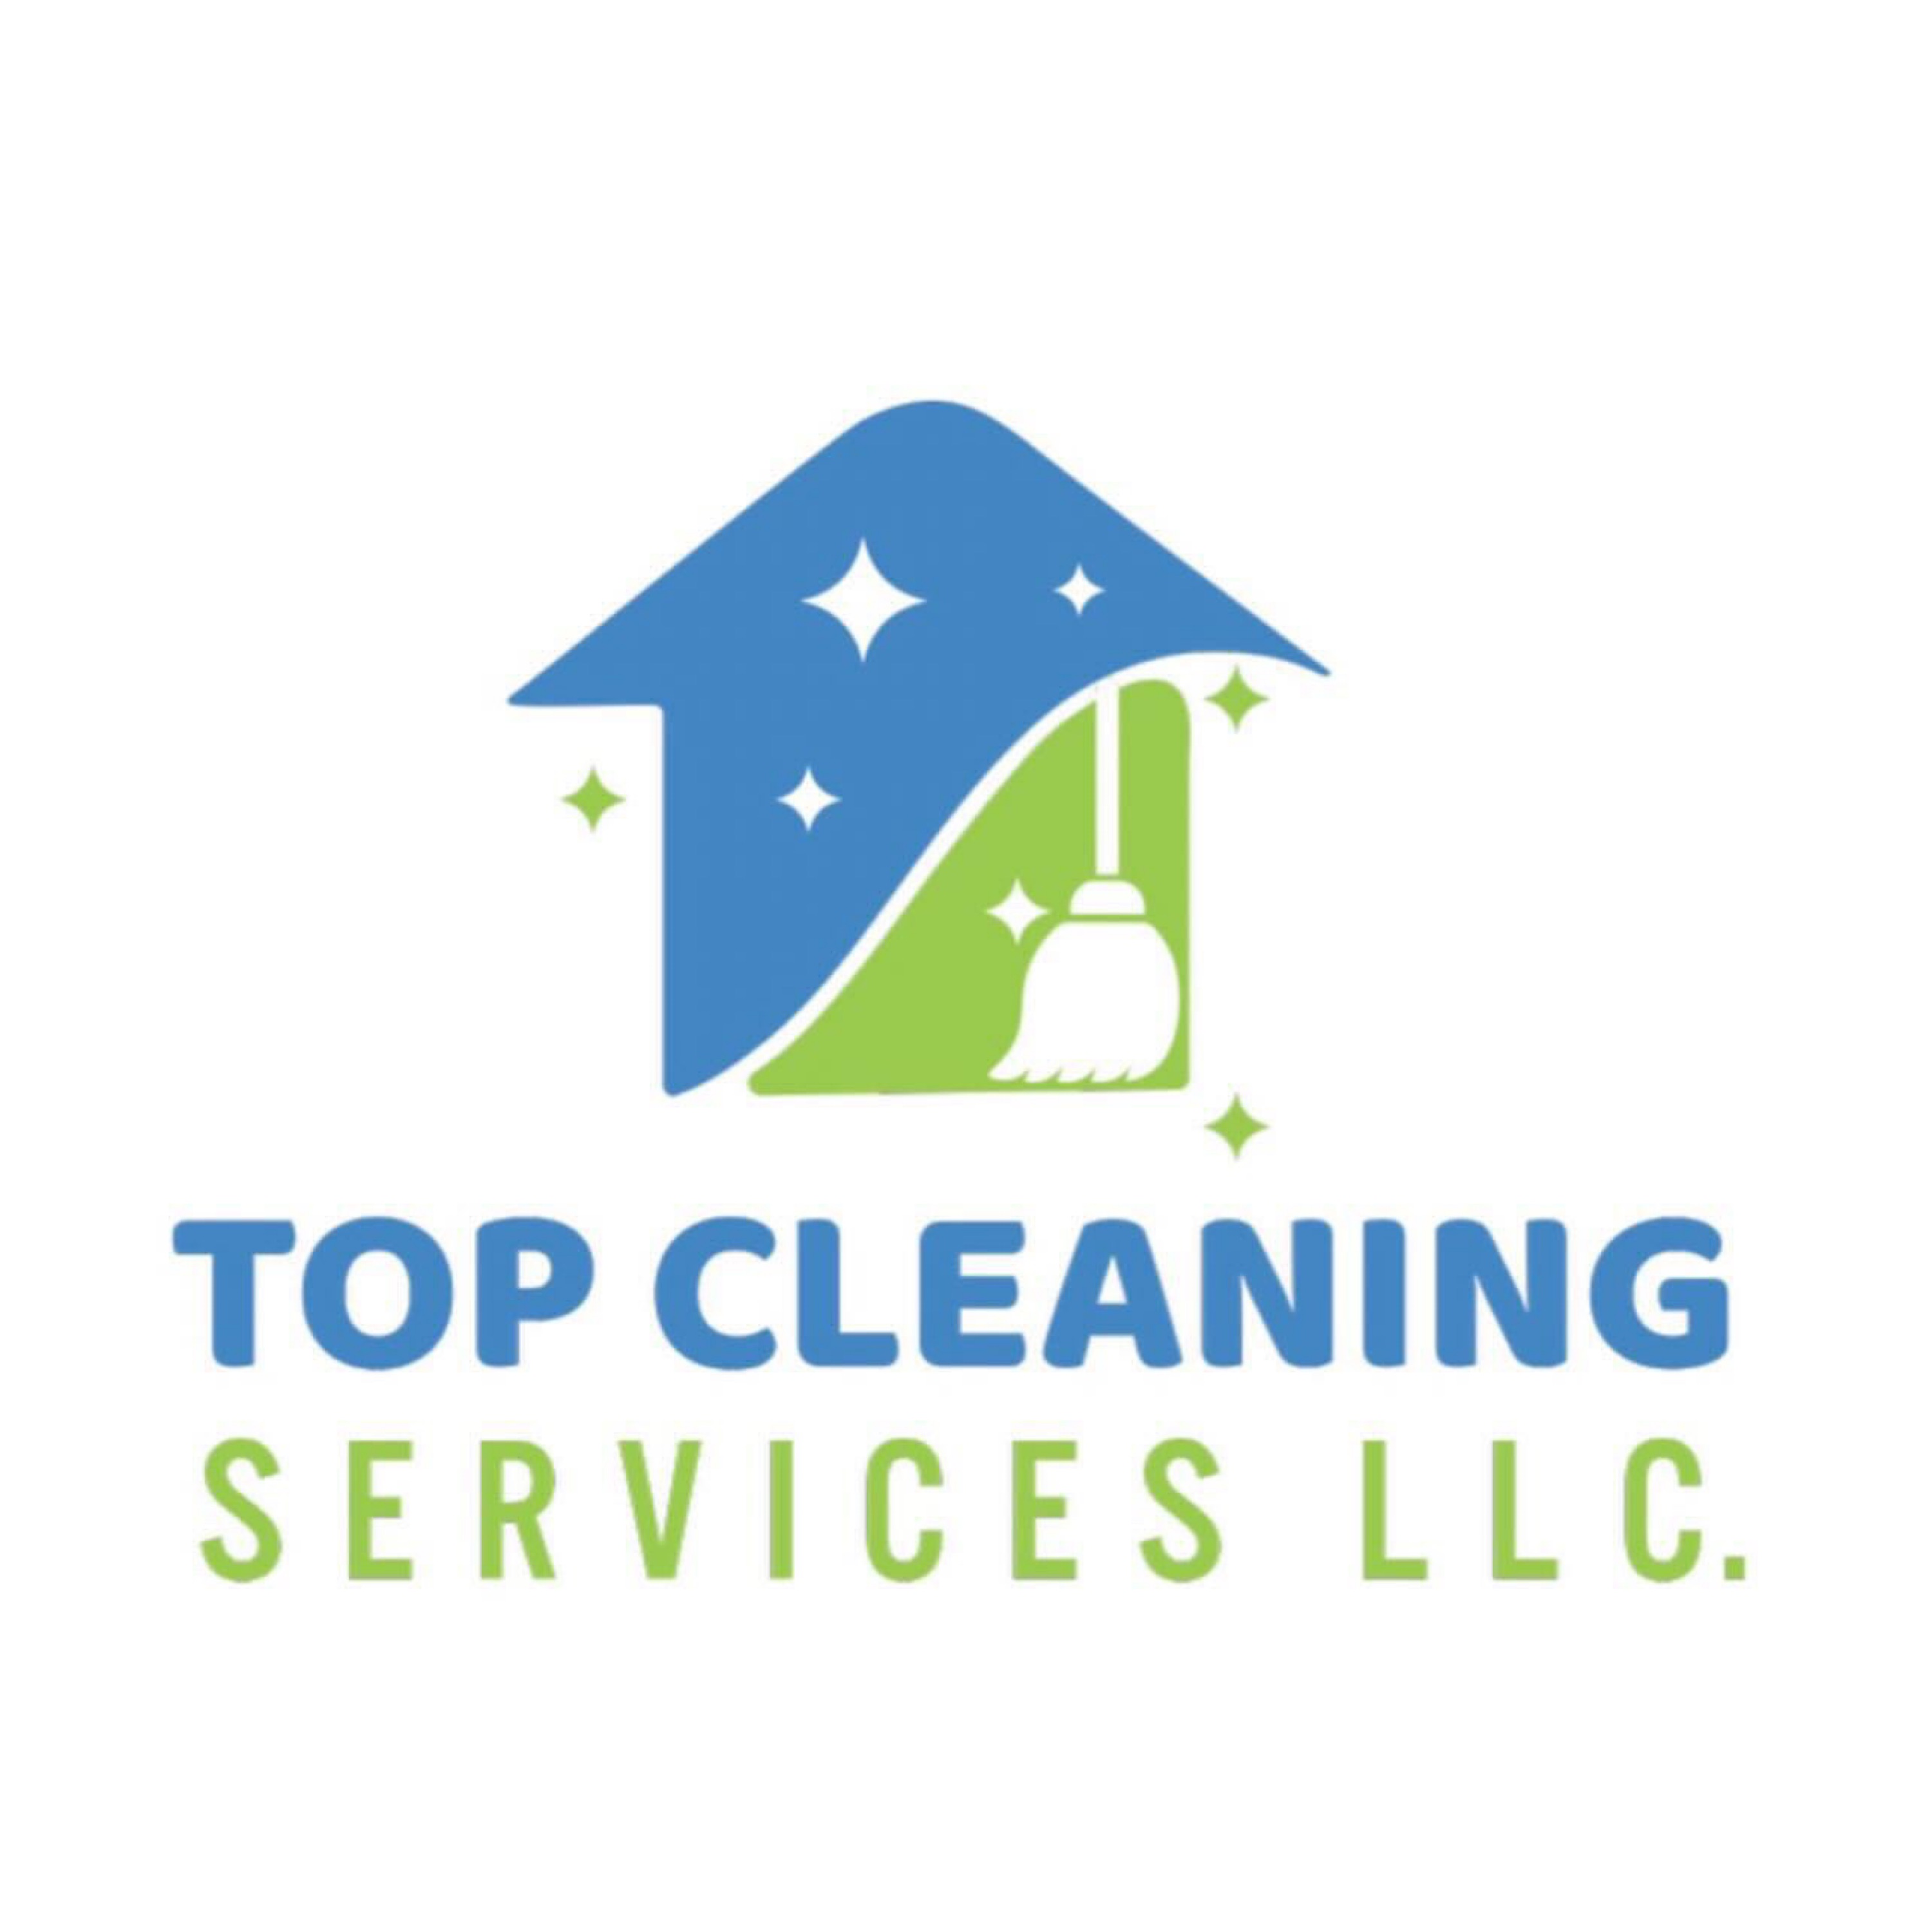 Top Cleaning Services Logo